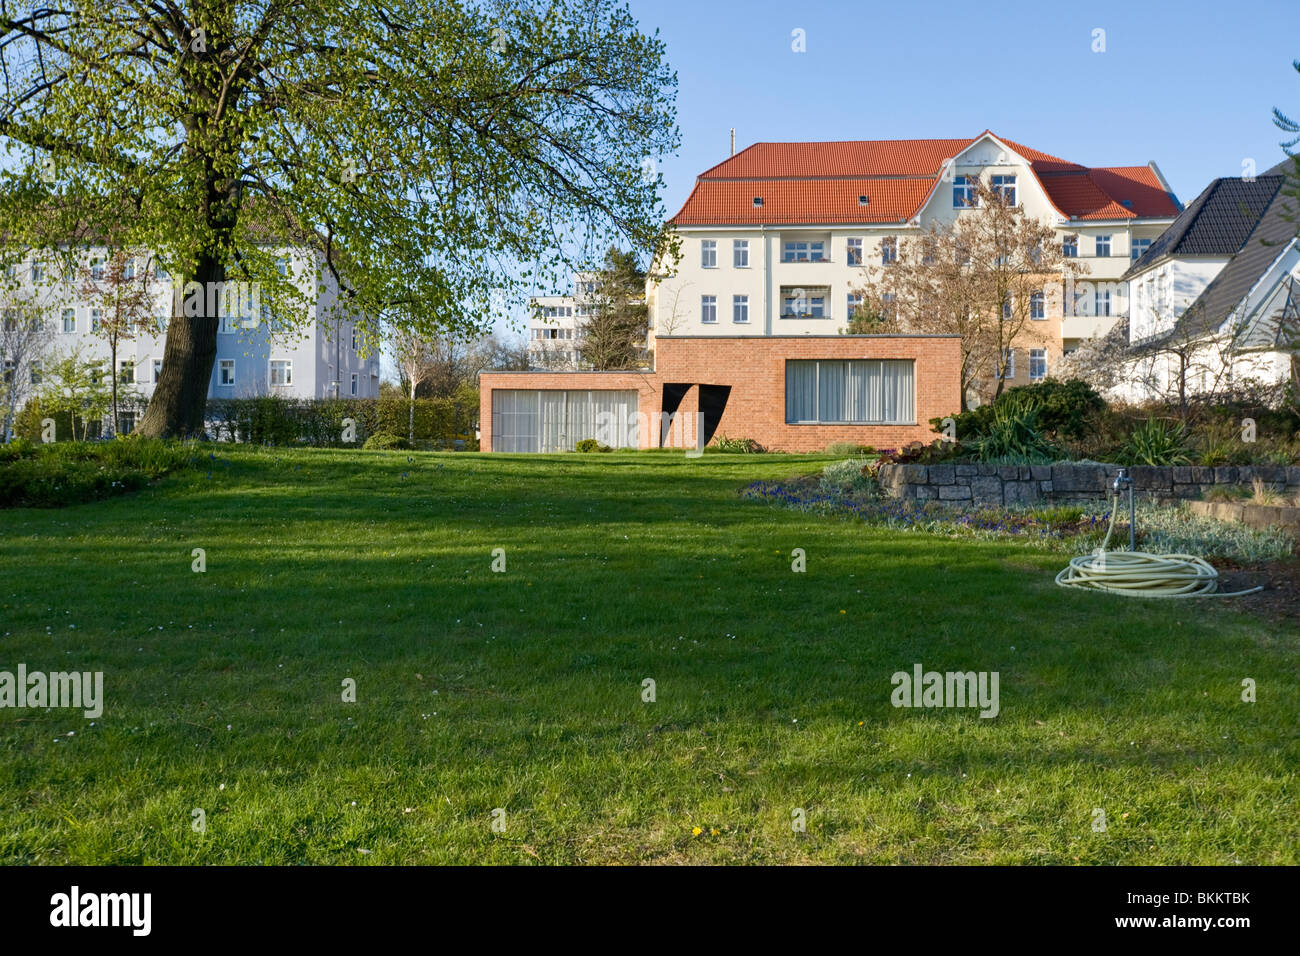 Mies van der Rohe house, last residential house designed by Ludwig Mies van  der Rohe in Germany, Berlin, Germany, Europe Stock Photo - Alamy